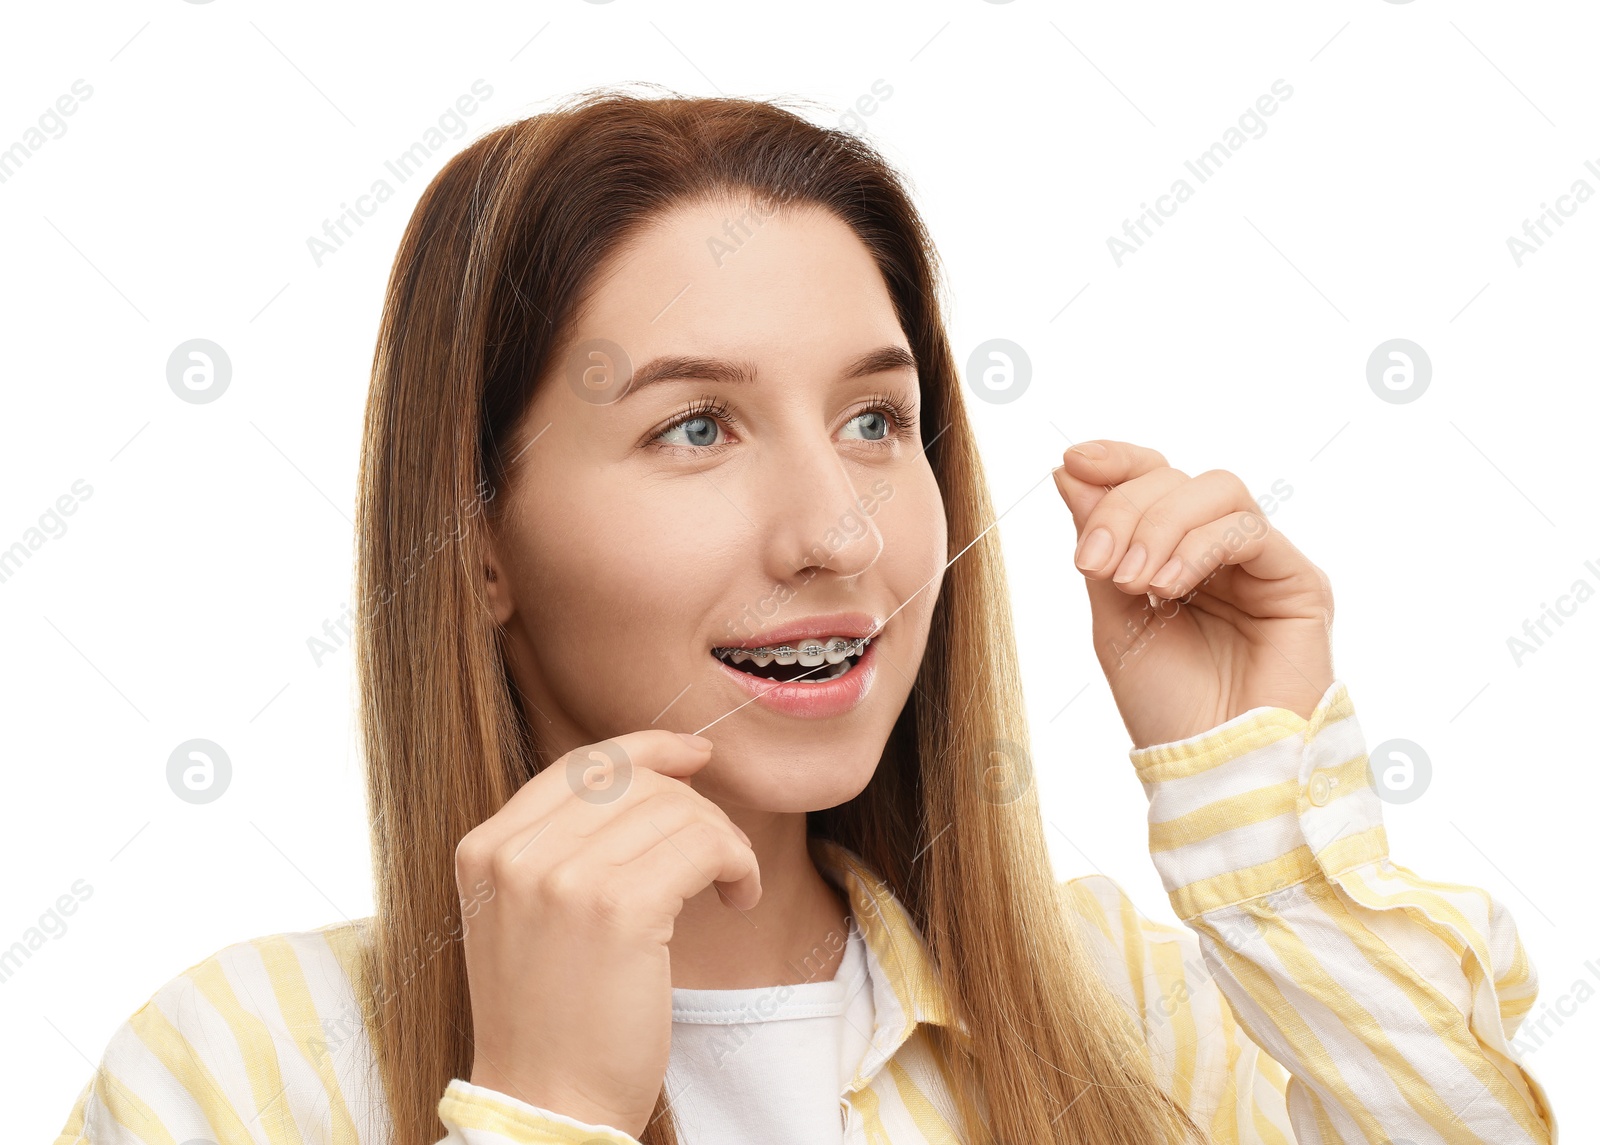 Photo of Smiling woman with braces cleaning teeth using dental floss on white background